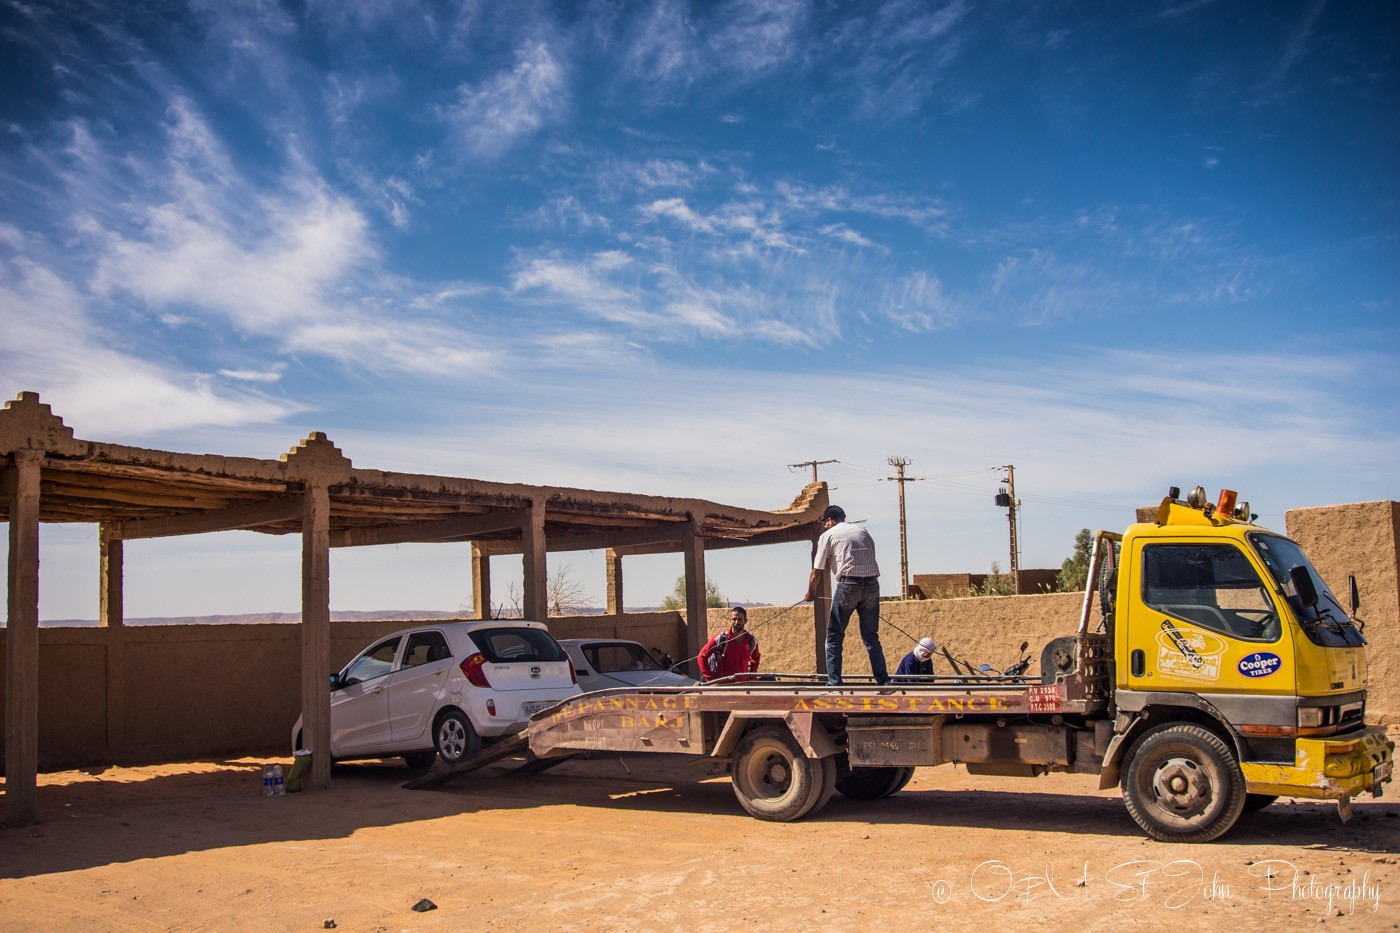 Car being towed from hotel in Merzourga, Sahara Desert. Morocco